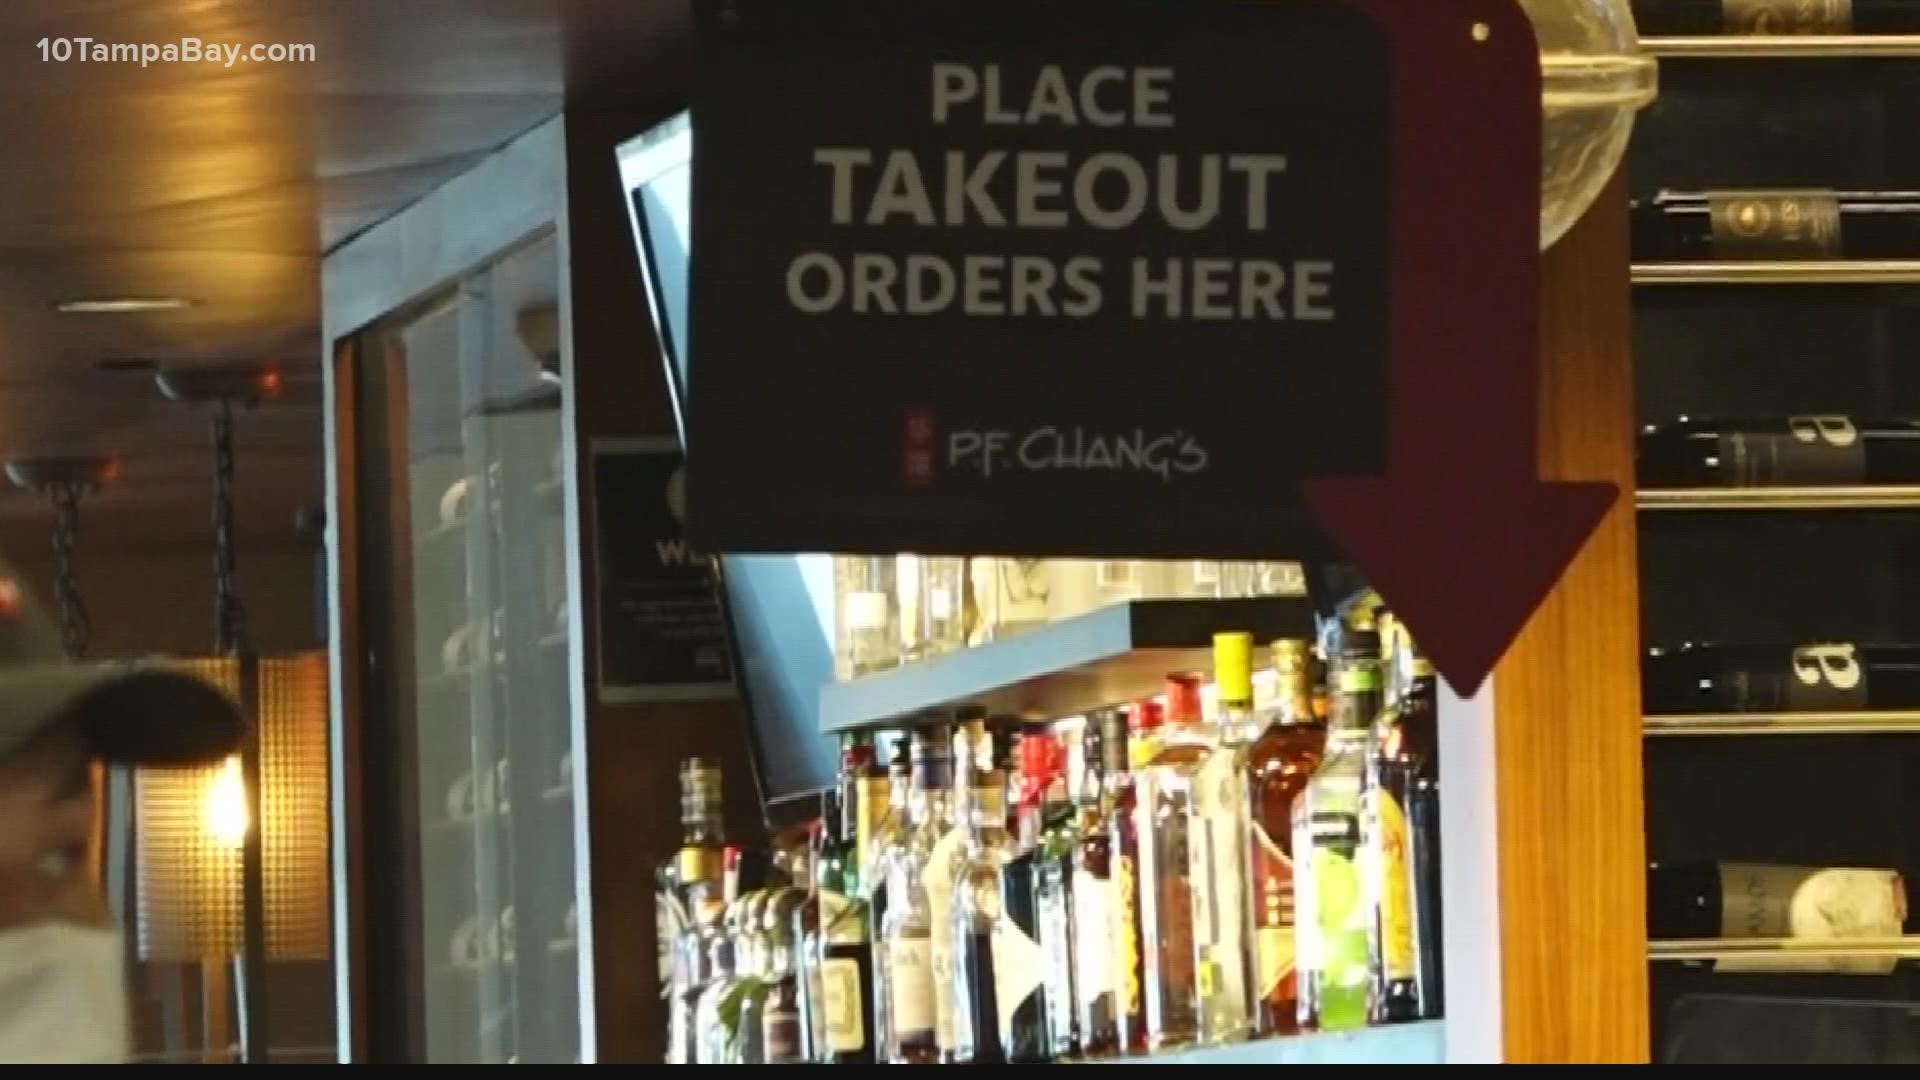 Some passengers say eliminating drinks-to-go would be unfair to the vast majority of passengers.